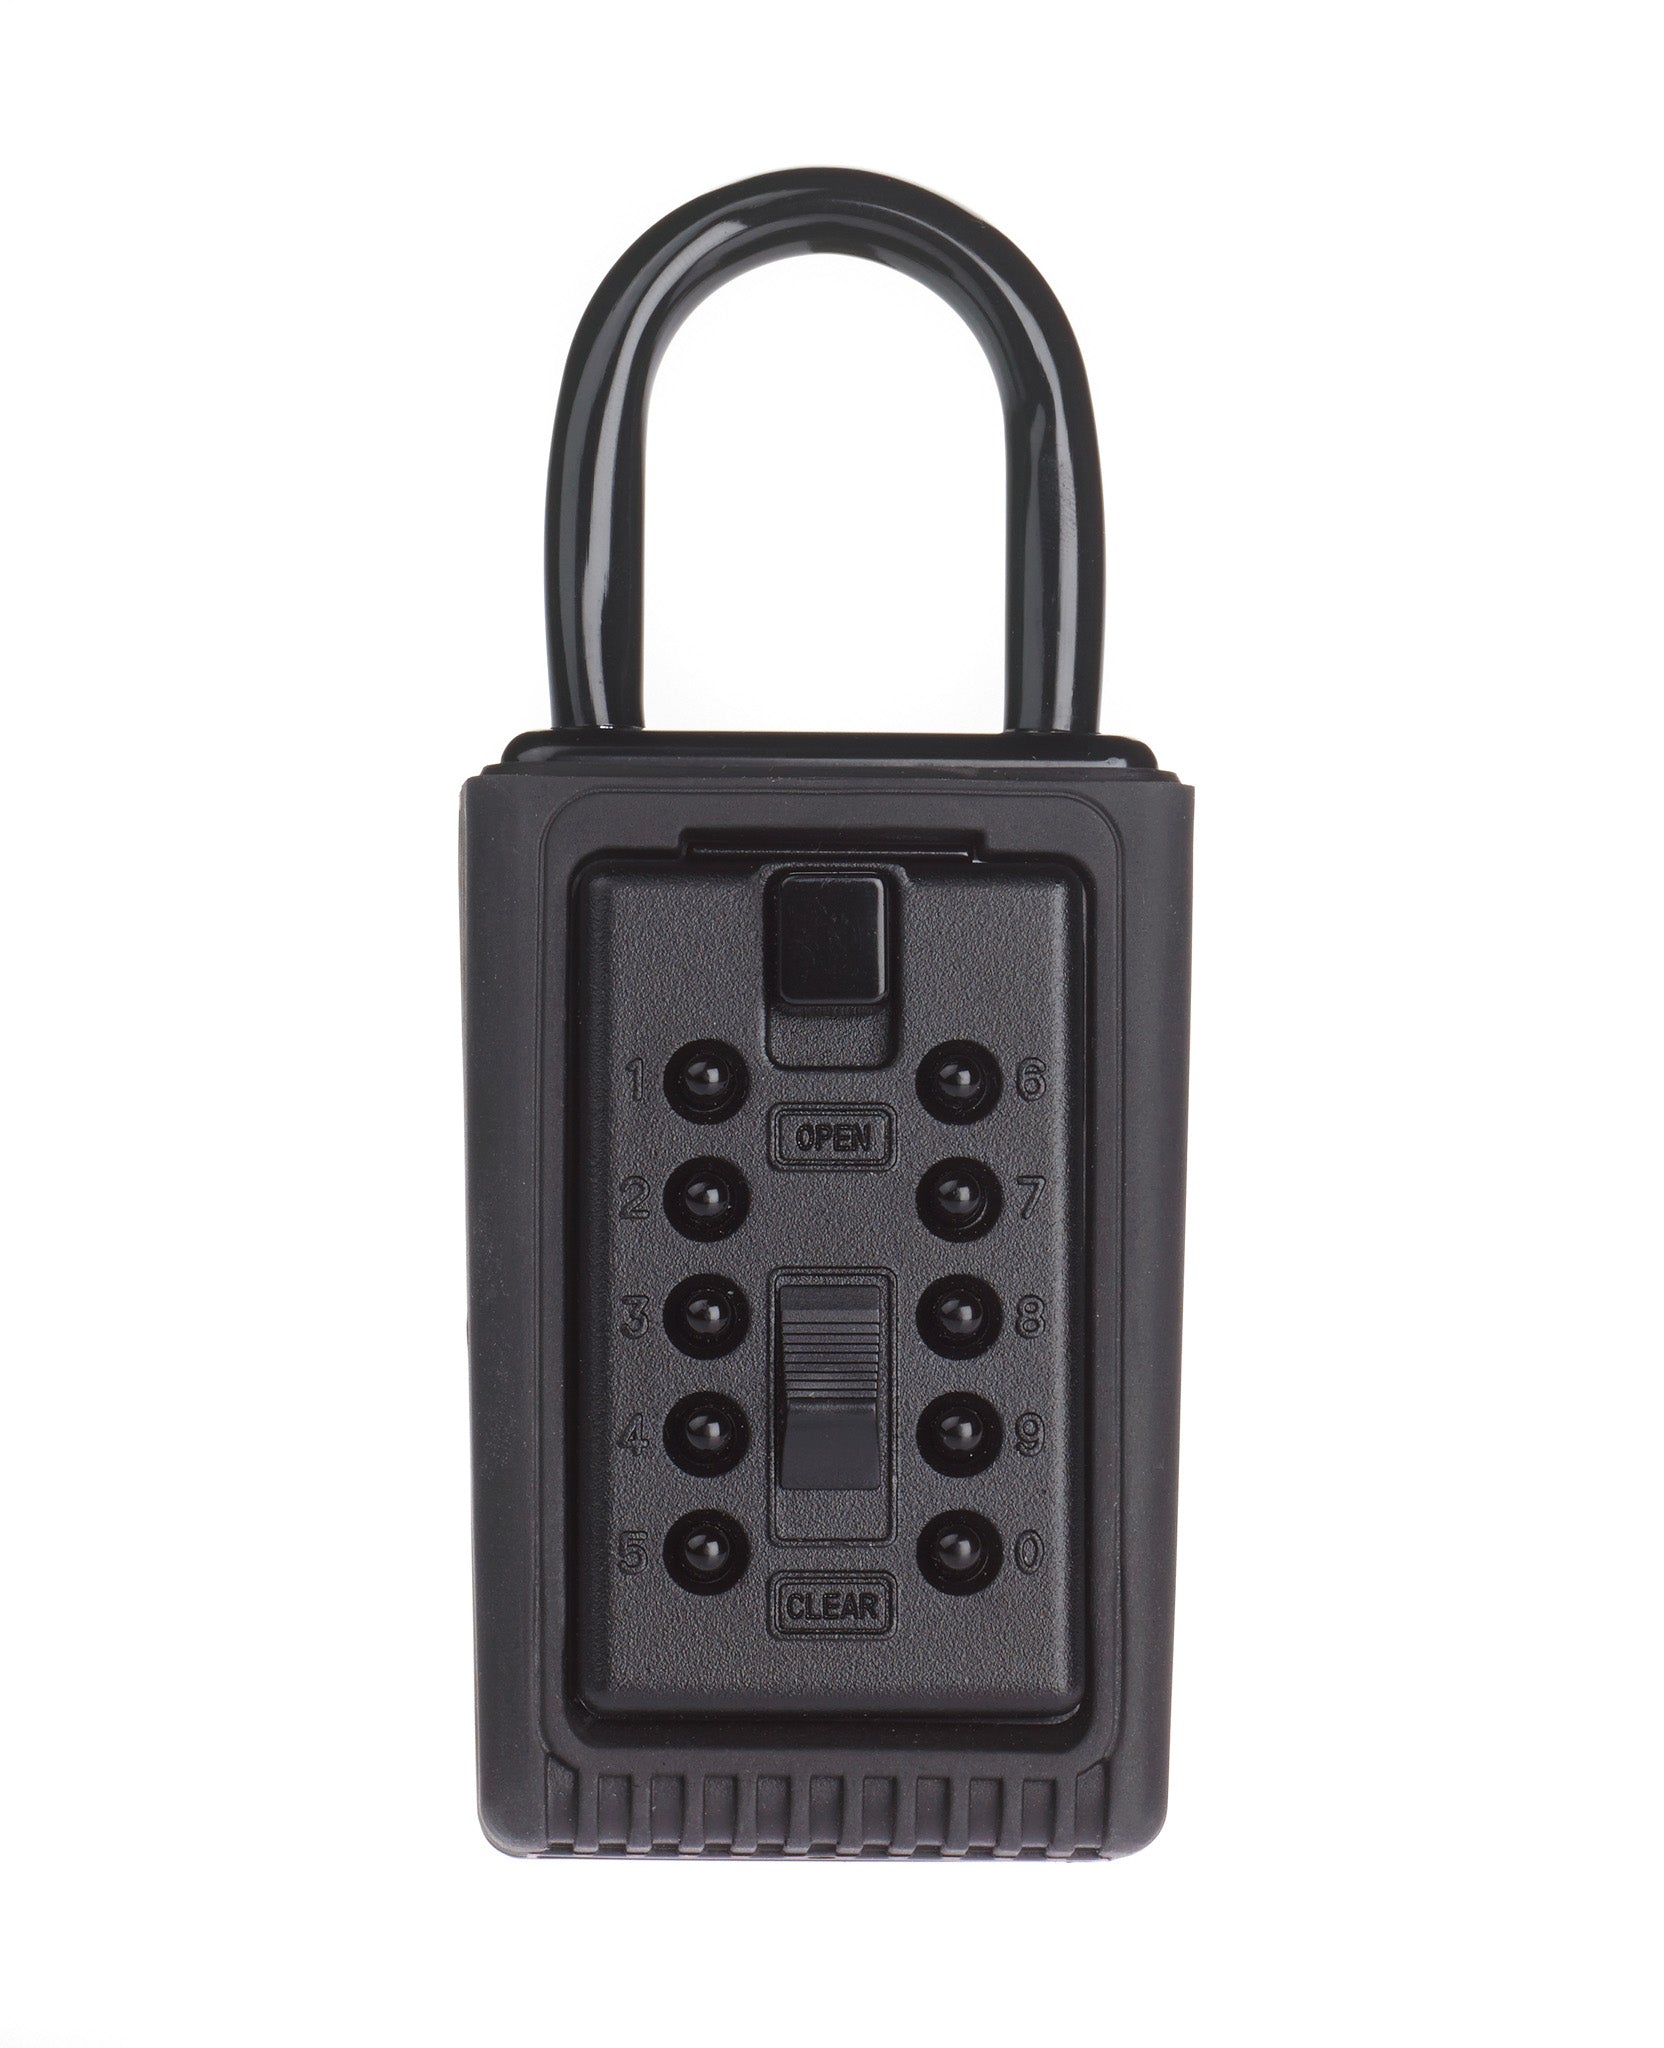 Black Supra portable key safe with closed shackle made from zinc alloy